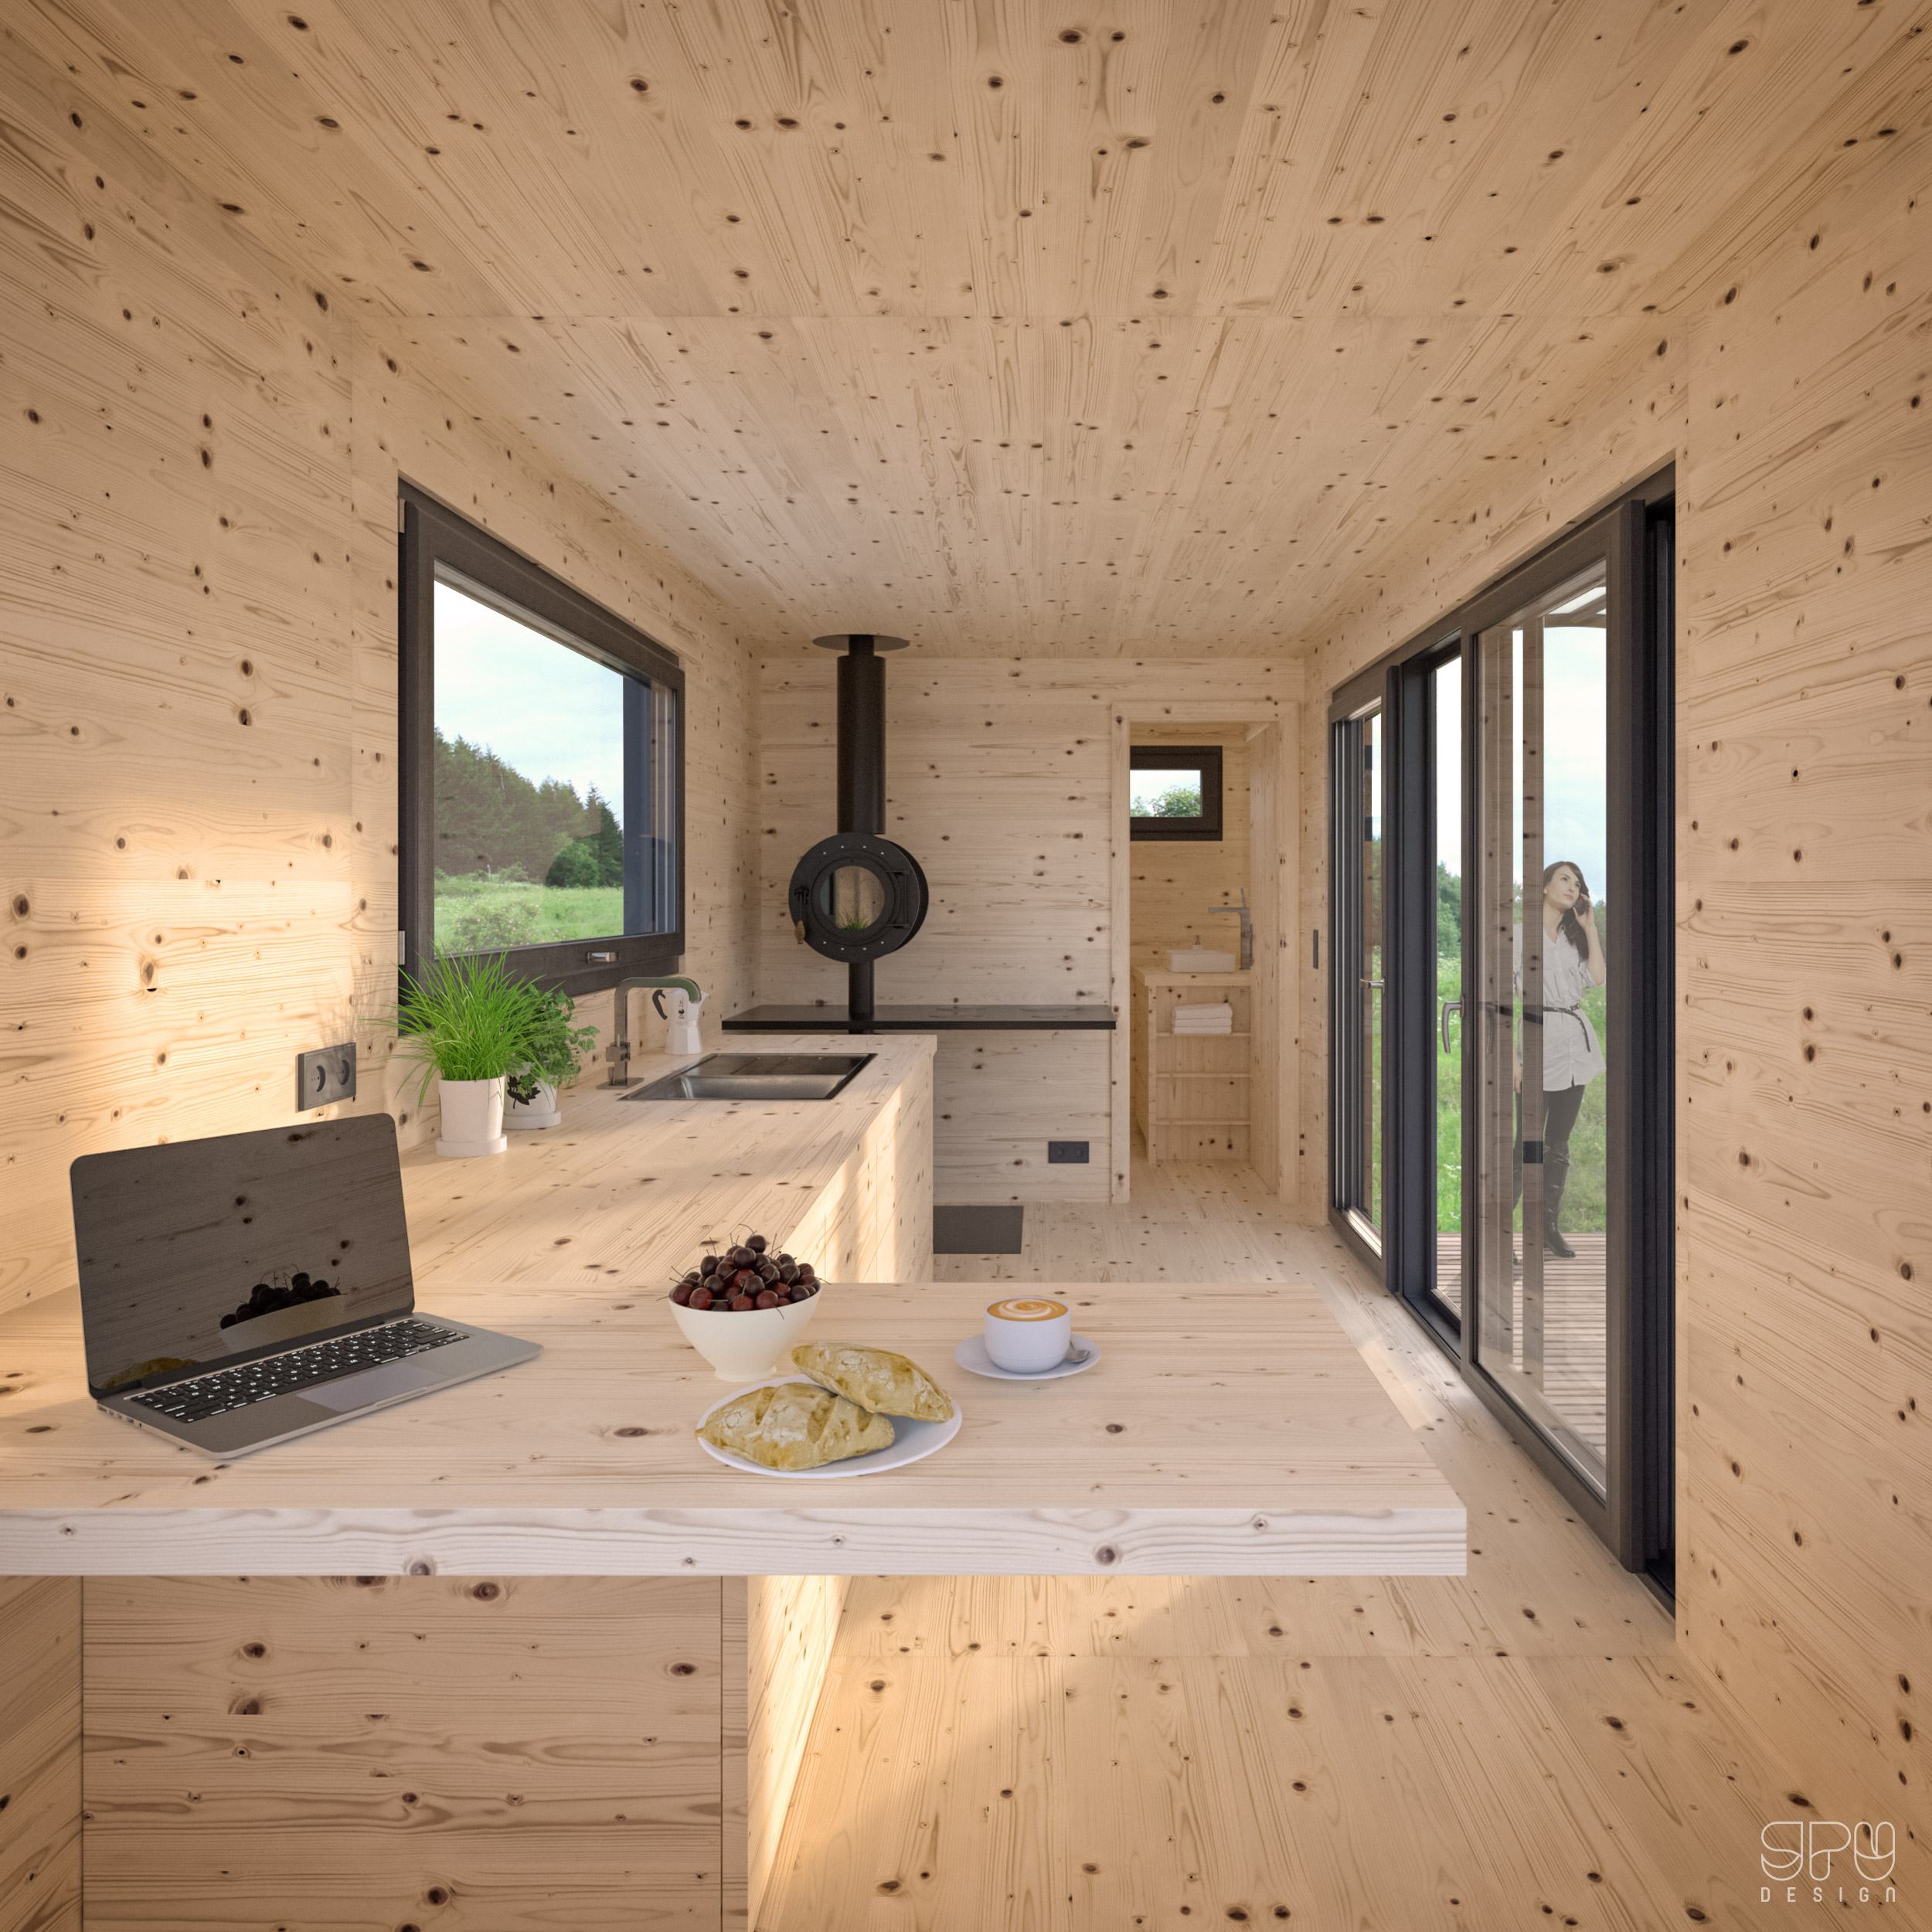 Mobile tiny house by GPU Design